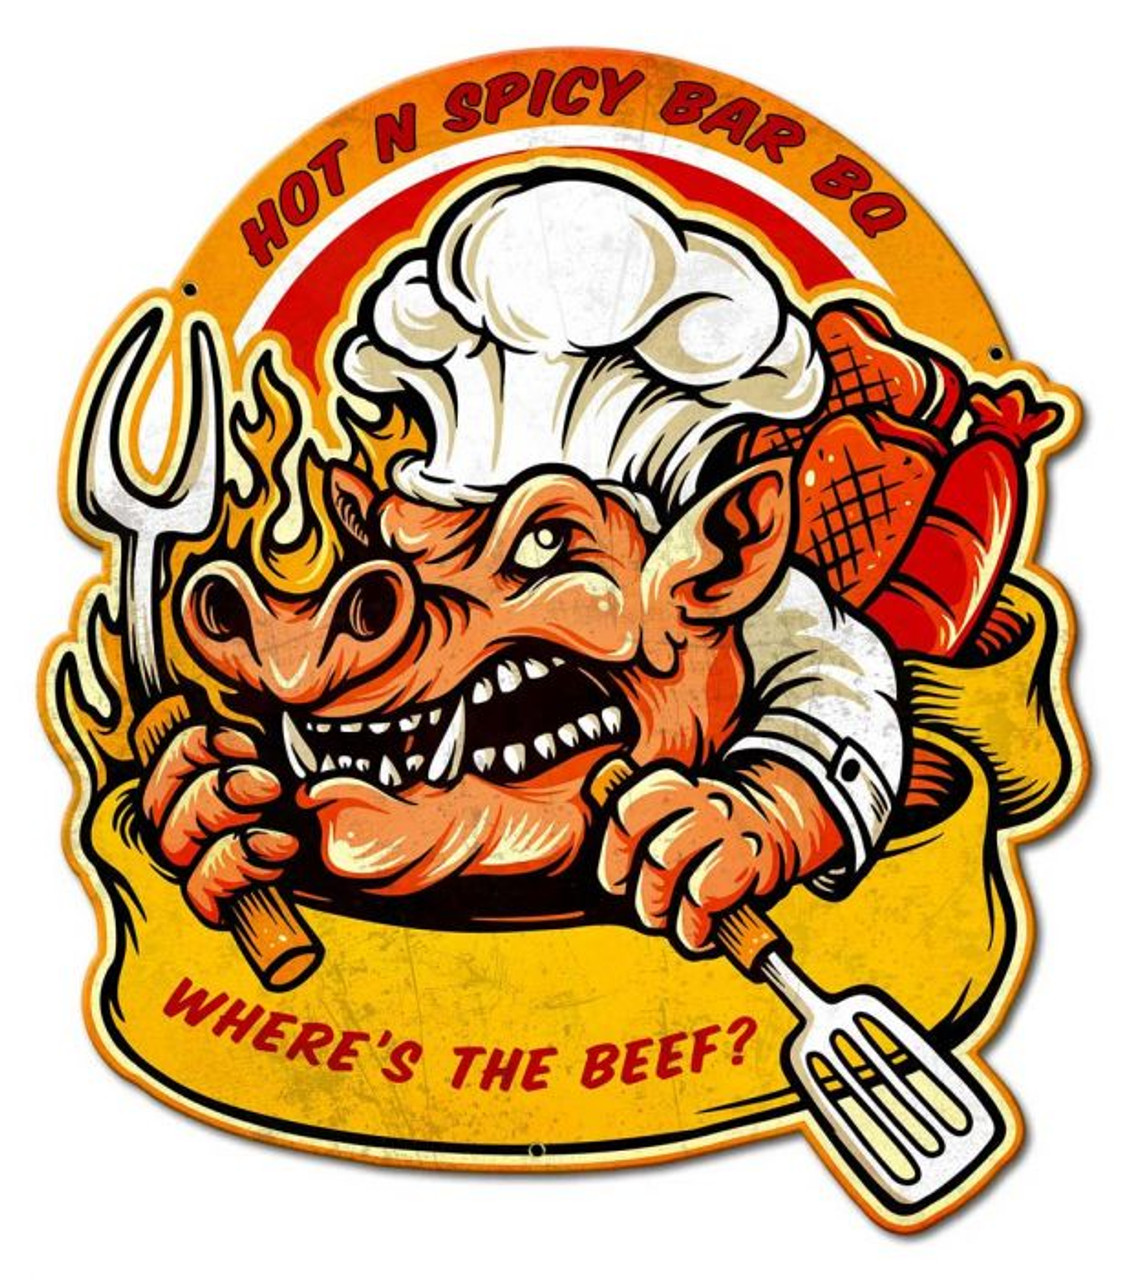 Hot N Spicy BBQ Metal Sign 21 x 24 Inches